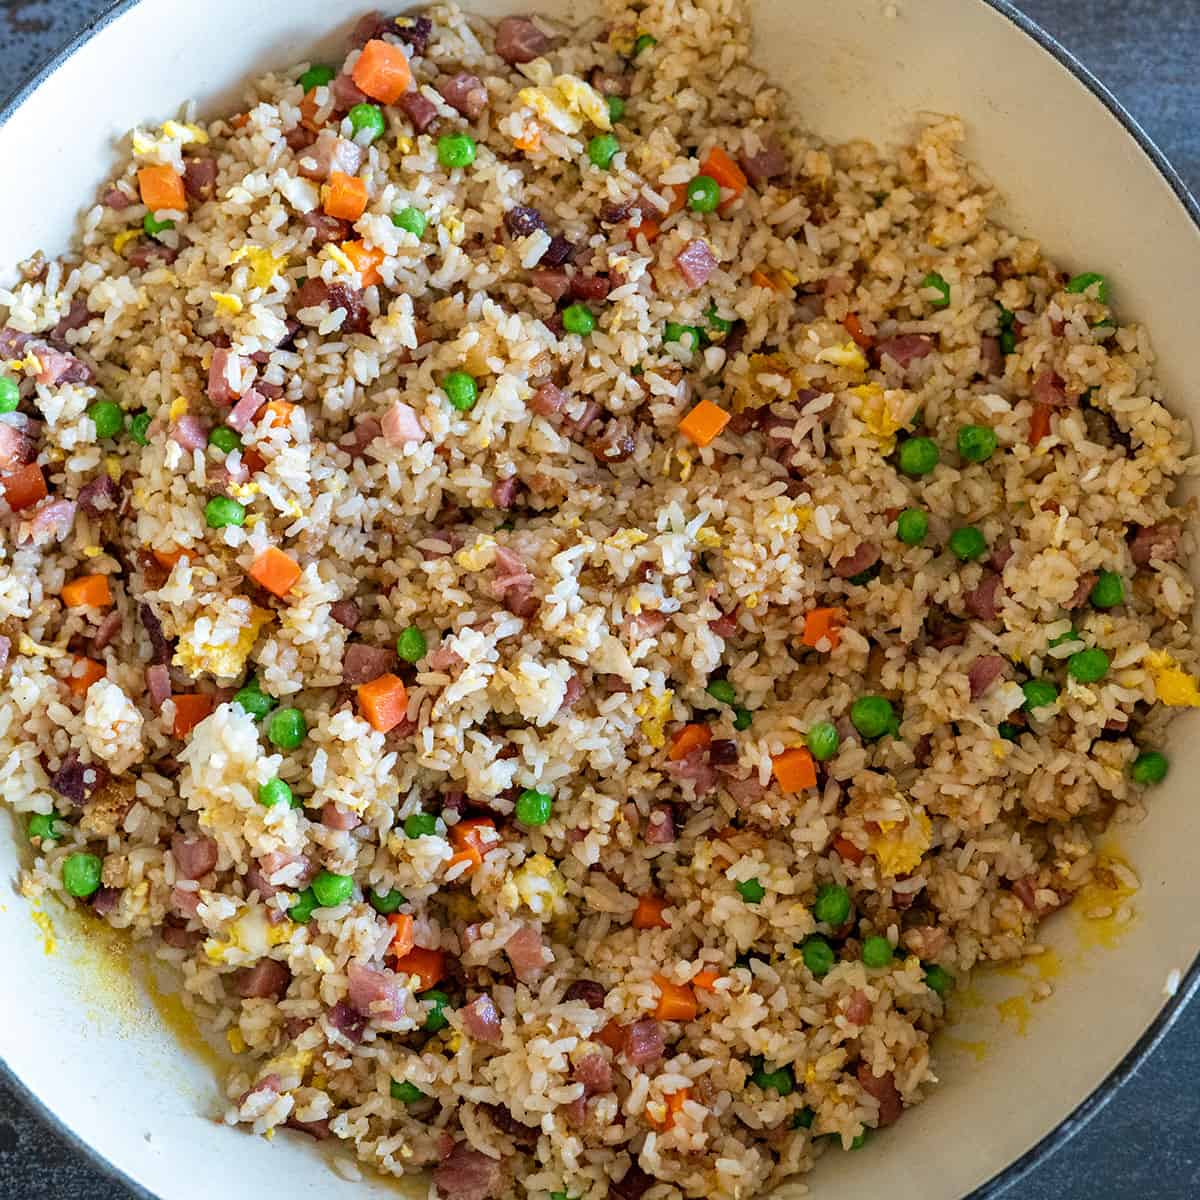 Skillet of fried rice.